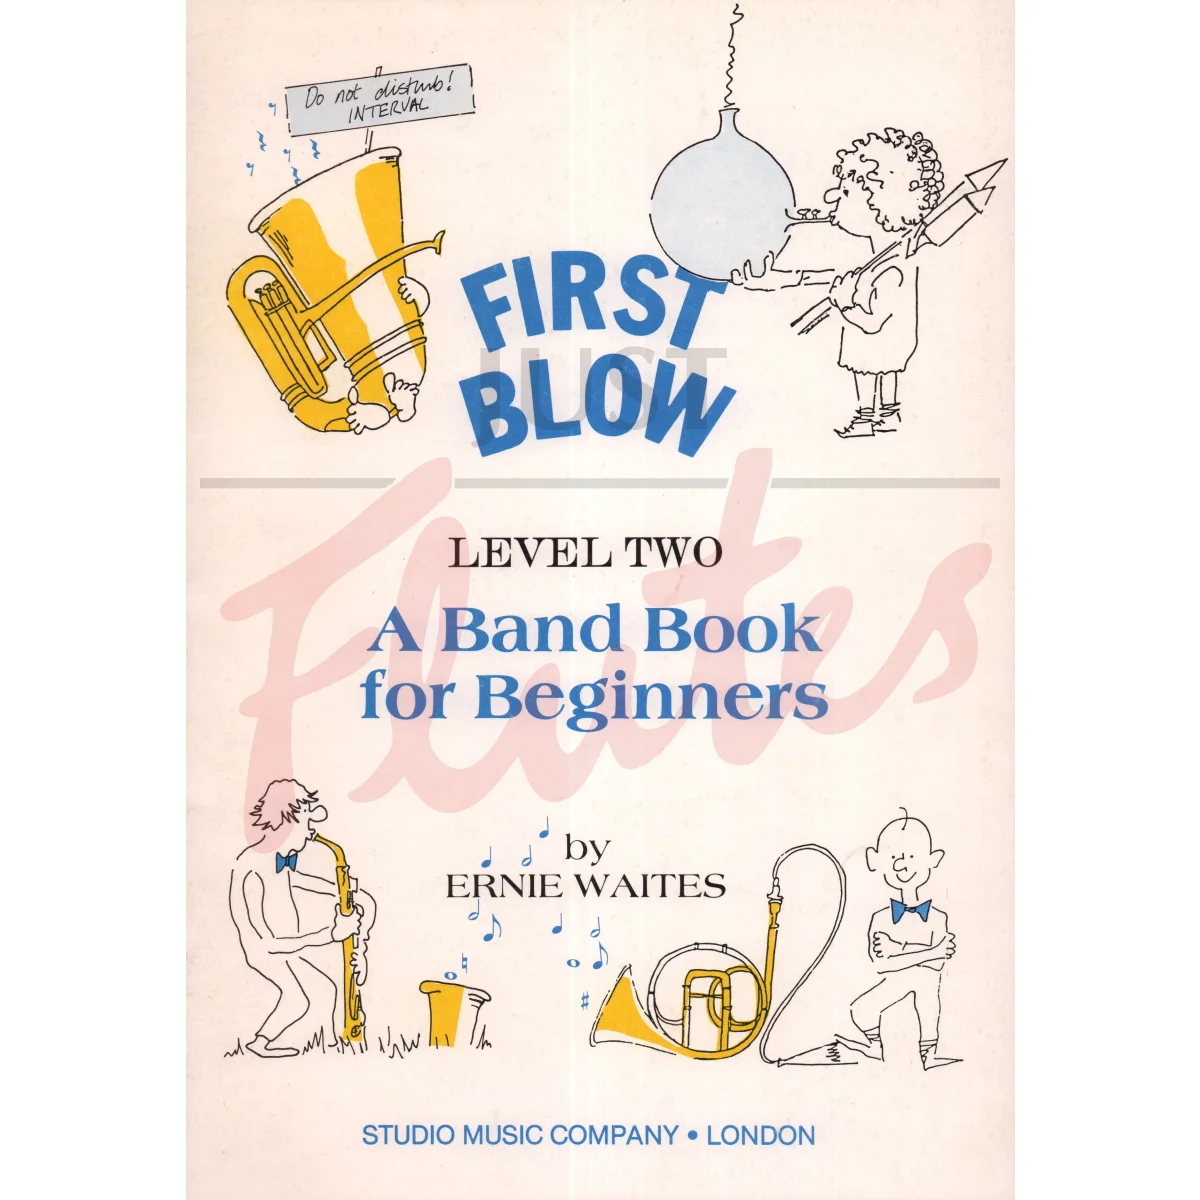 First Blow - Level Two A Band Book for Beginners